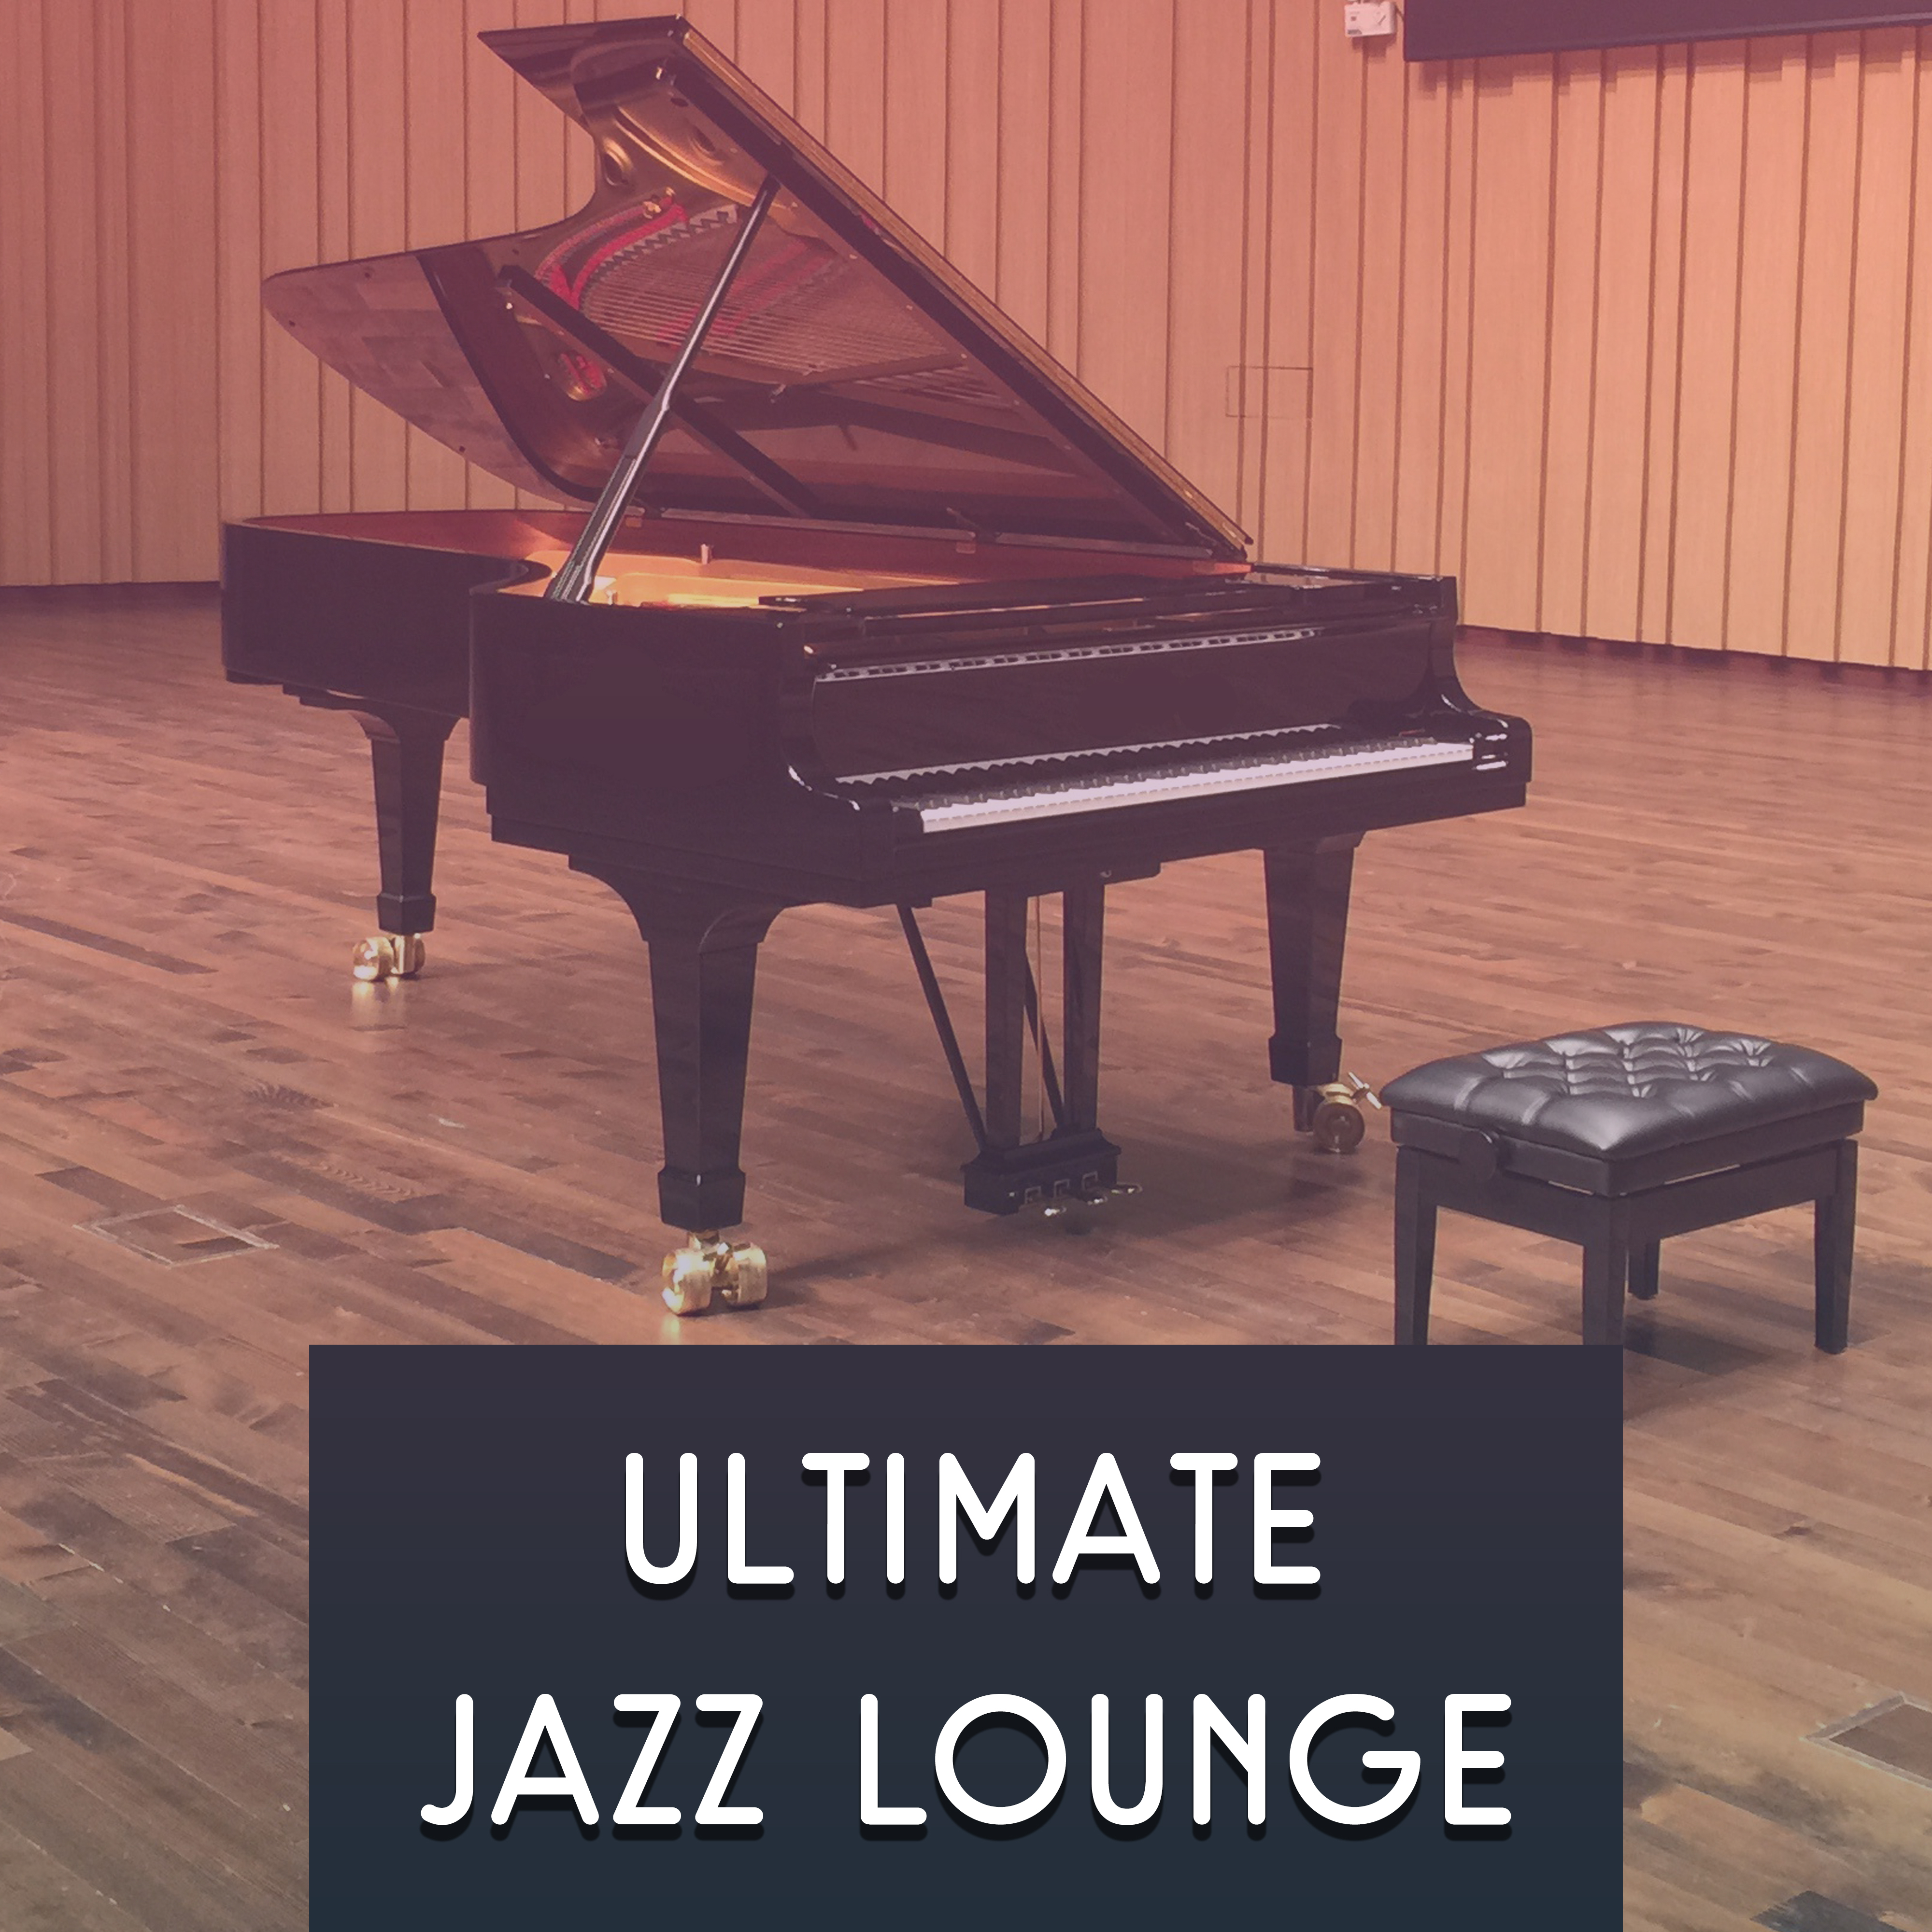 Ultimate Jazz Lounge  Smooth Jazz, Piano Sounds, Mellow Jazz, Instrumental Music, Relaxed Jazz Lounge